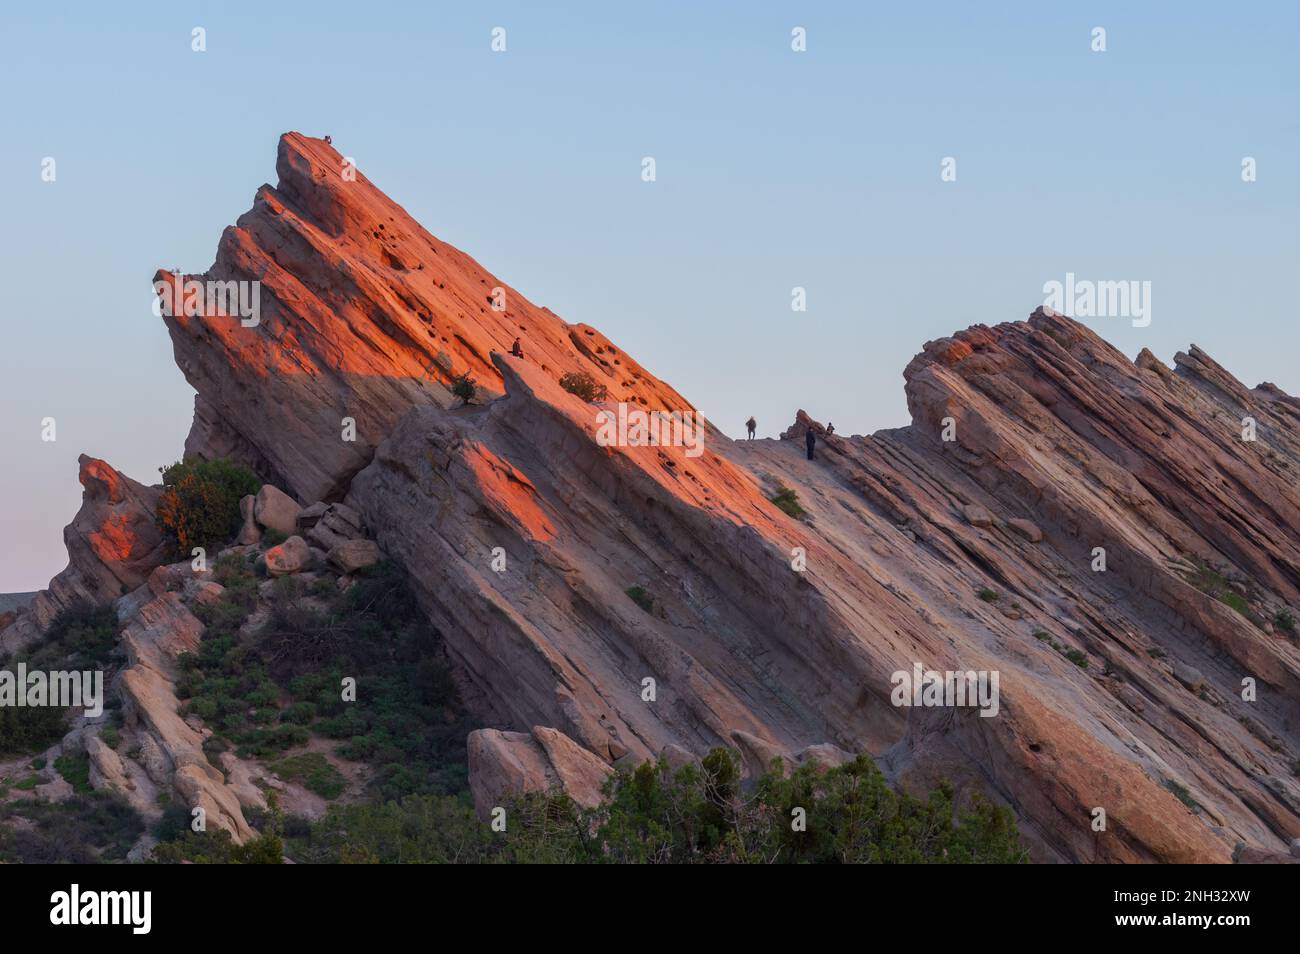 Vasquez Rocks Natural Area Park located in the Sierra Pelona Mountains. This geological feature has been used in many movies an commercials. Stock Photo